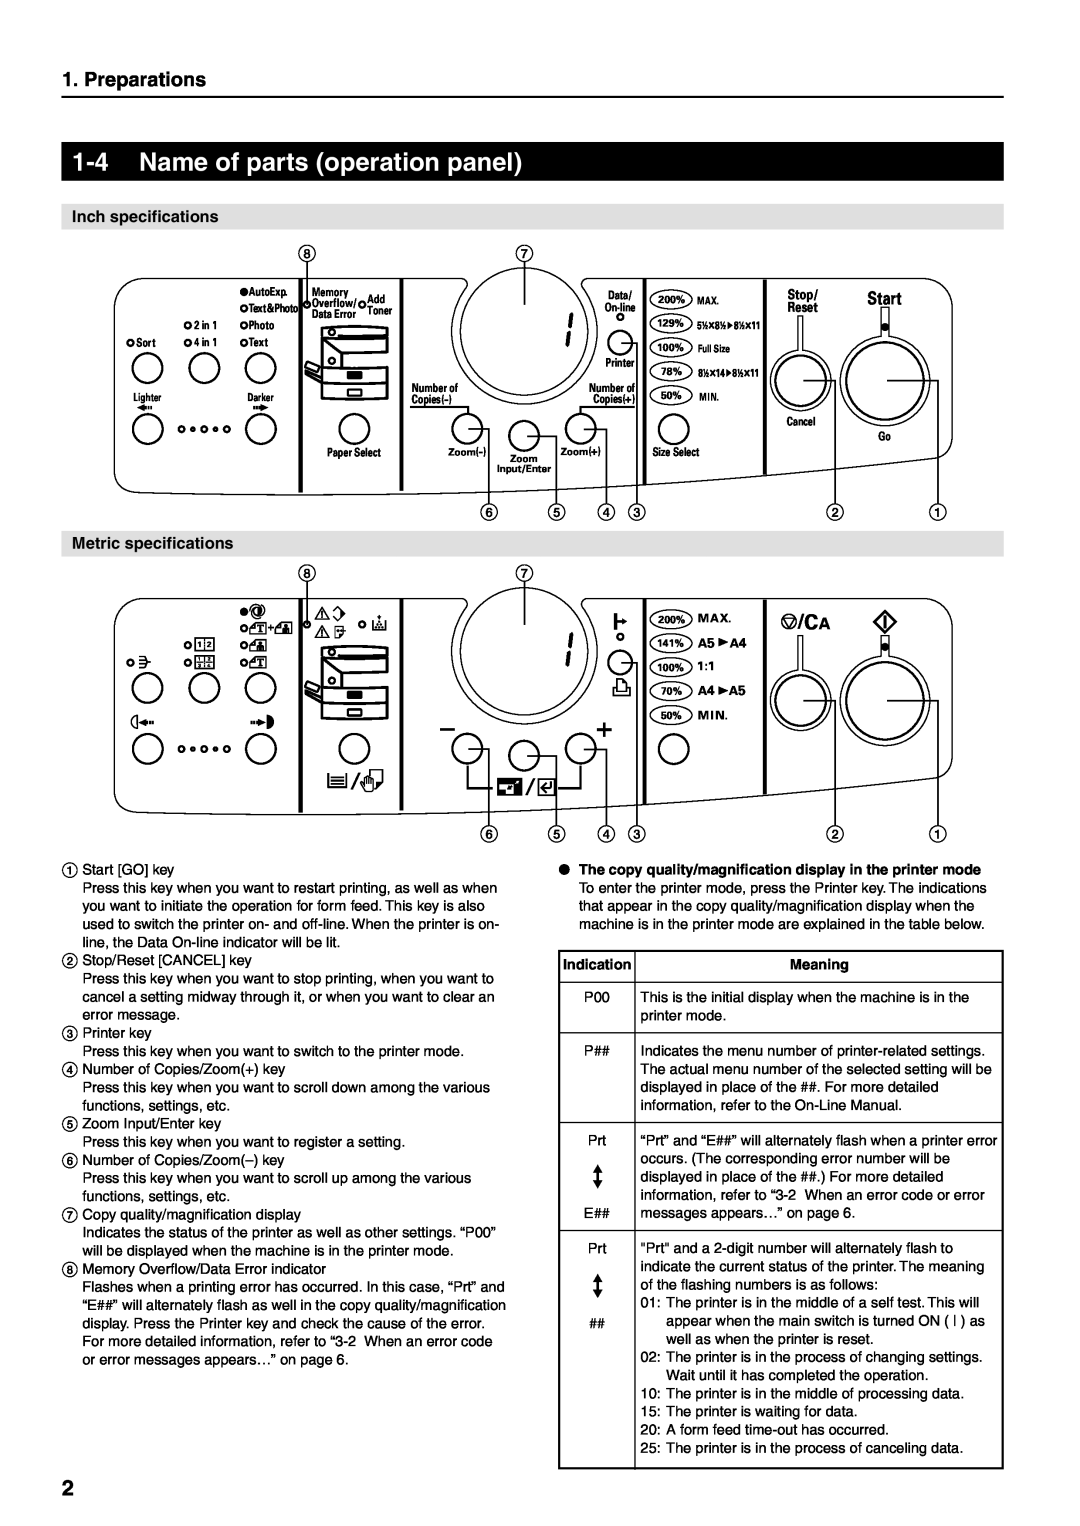 Oce North America OP14 manual Name of parts operation panel, Preparations, 6 5 4, Meaning 